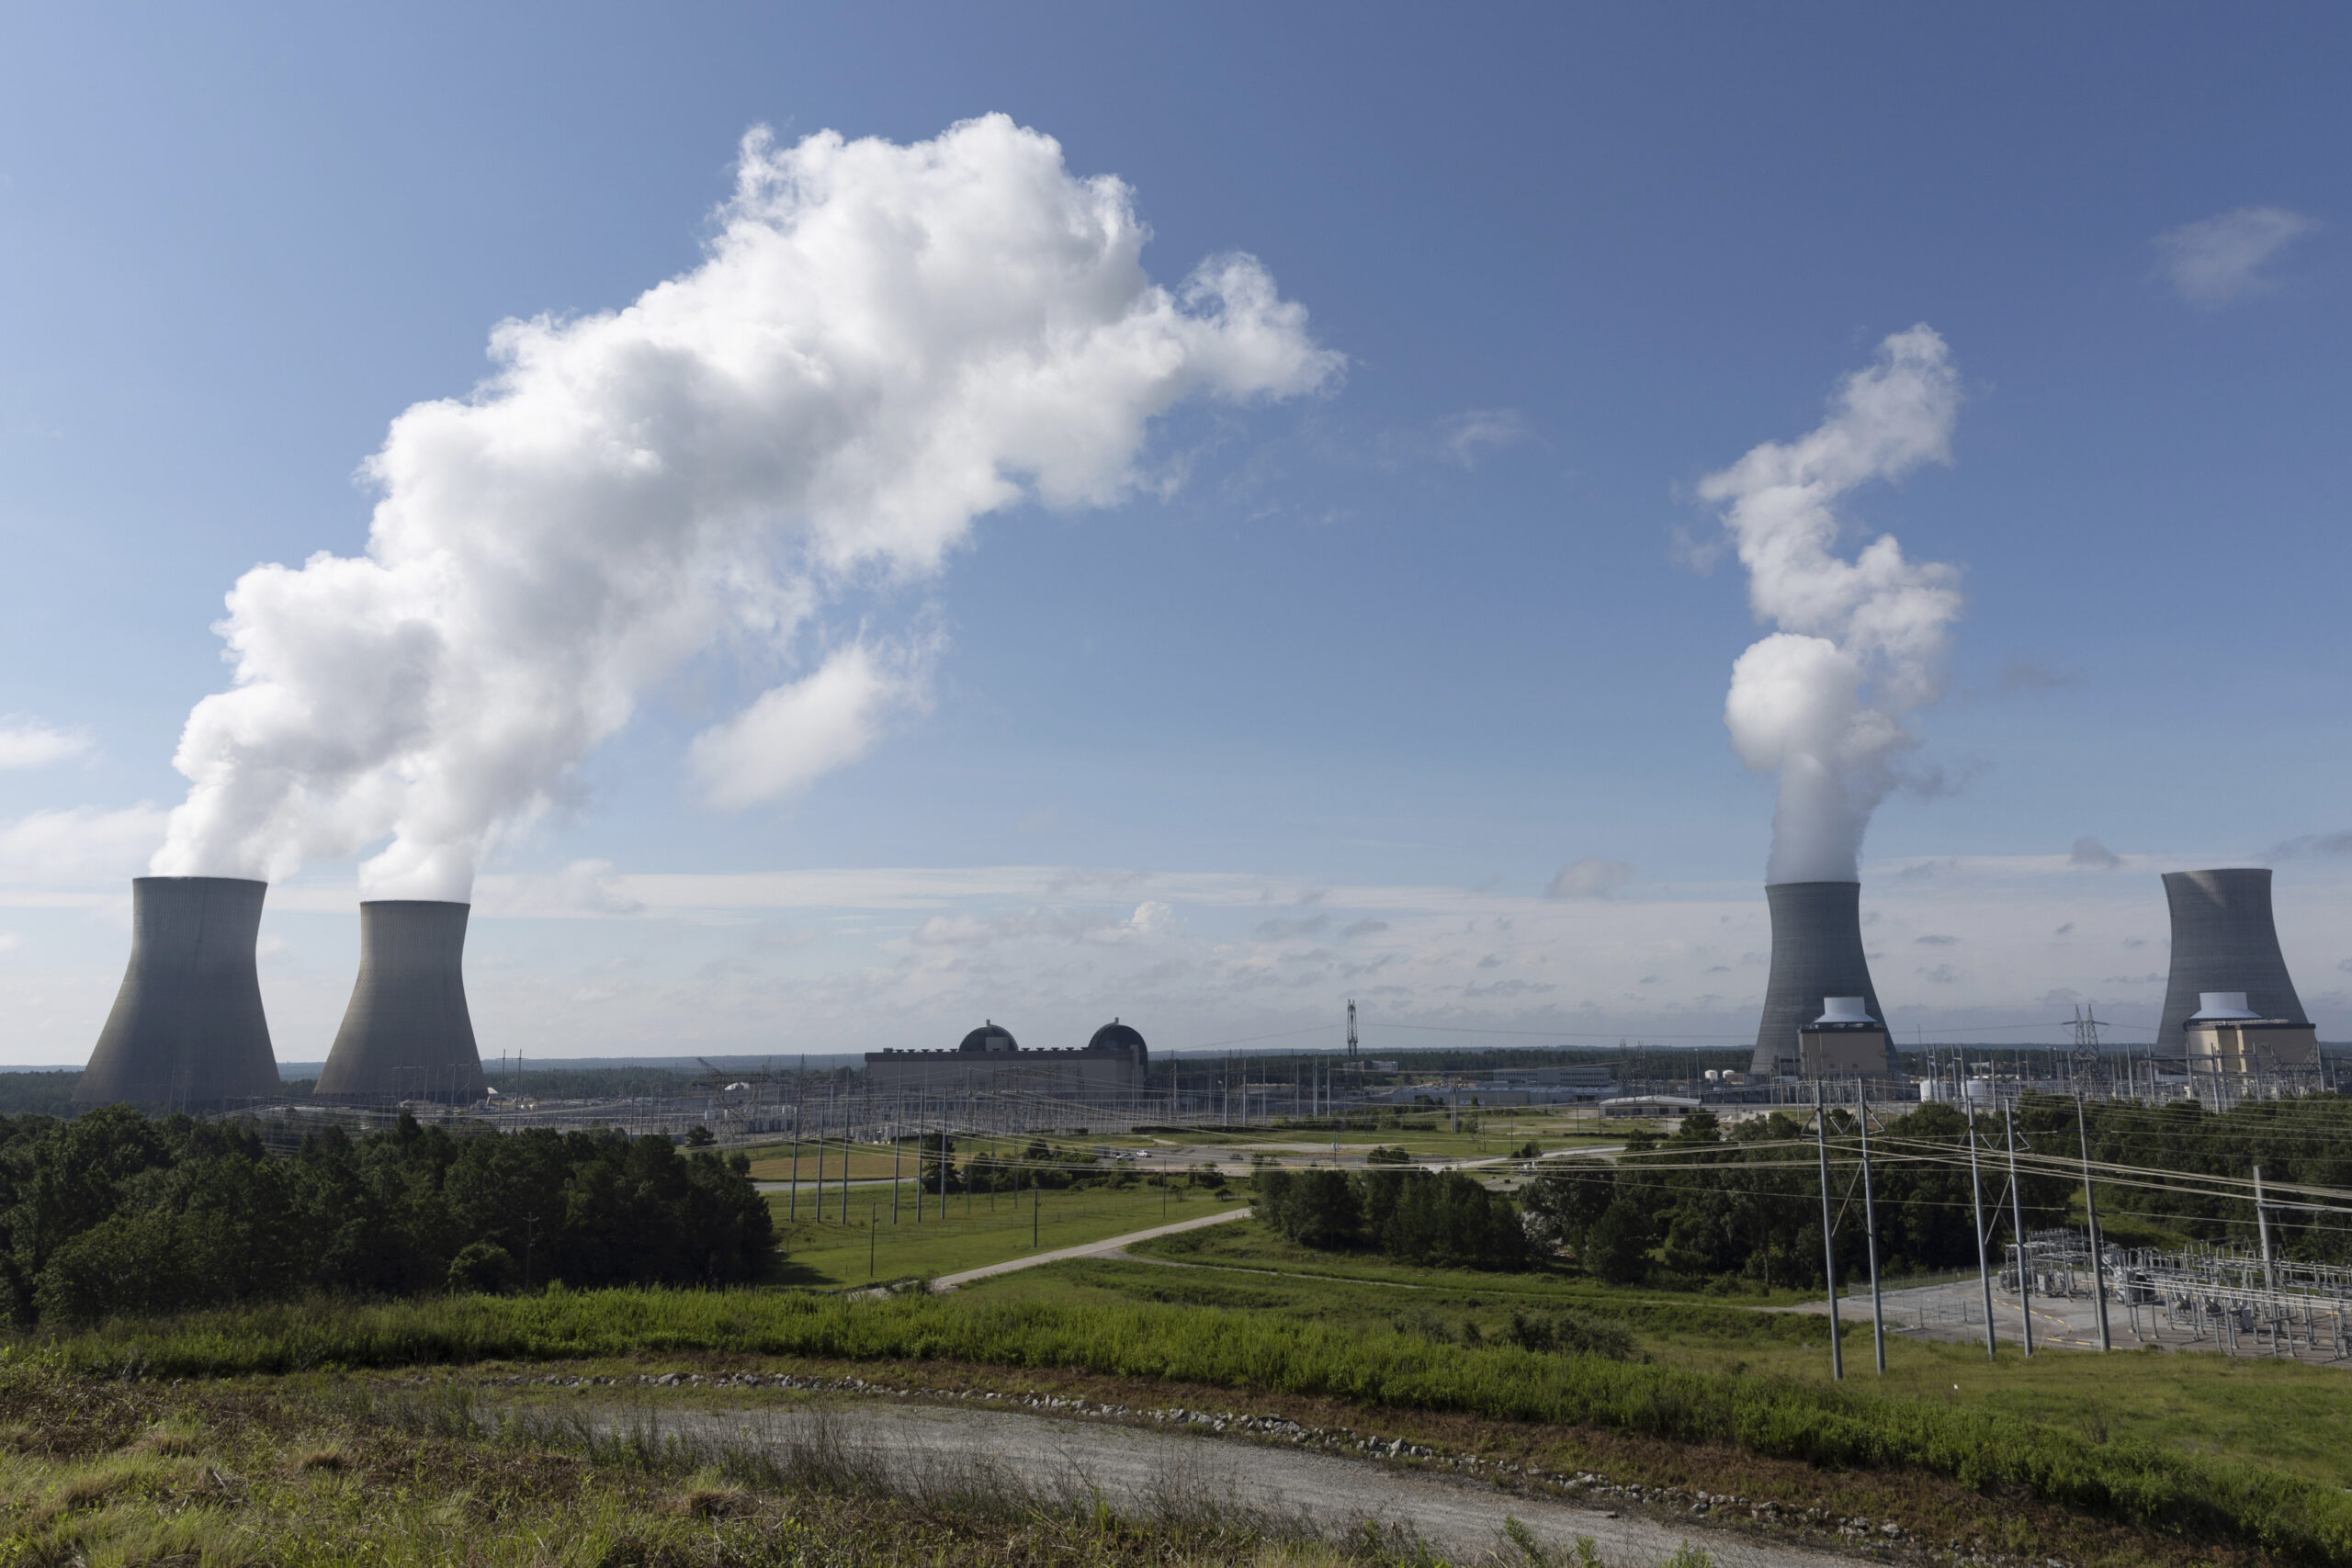 Nuclear reactors and cooling towers of the four units of Plant Vogtle, a nuclear plant near Waynesb...